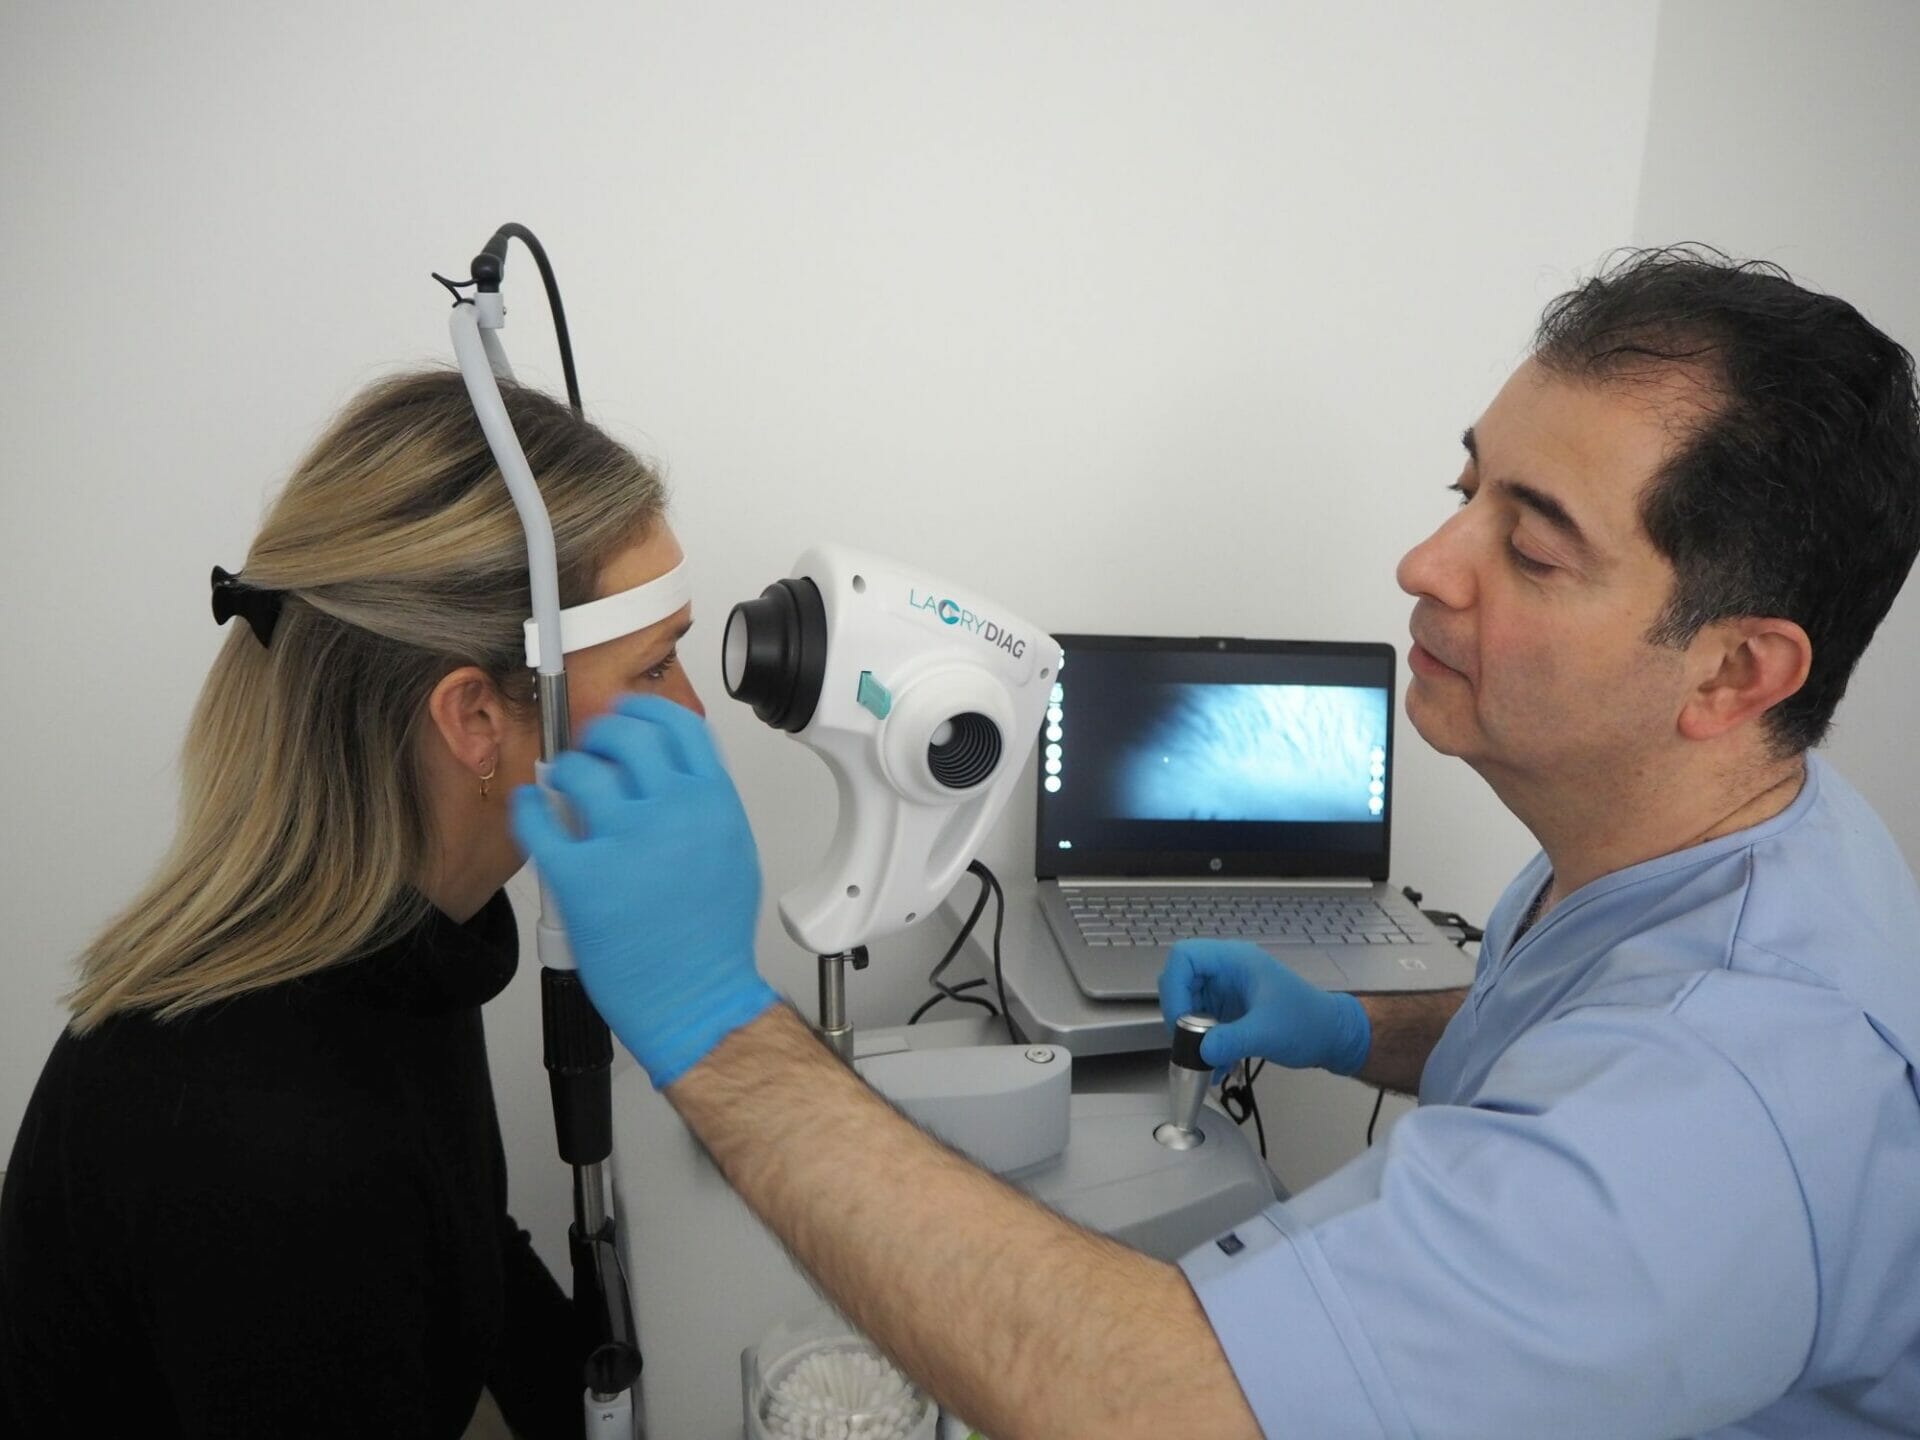 Mr Samer Hamada using an ocular surface analyzer to help diagnose a patient's dry eye disease.